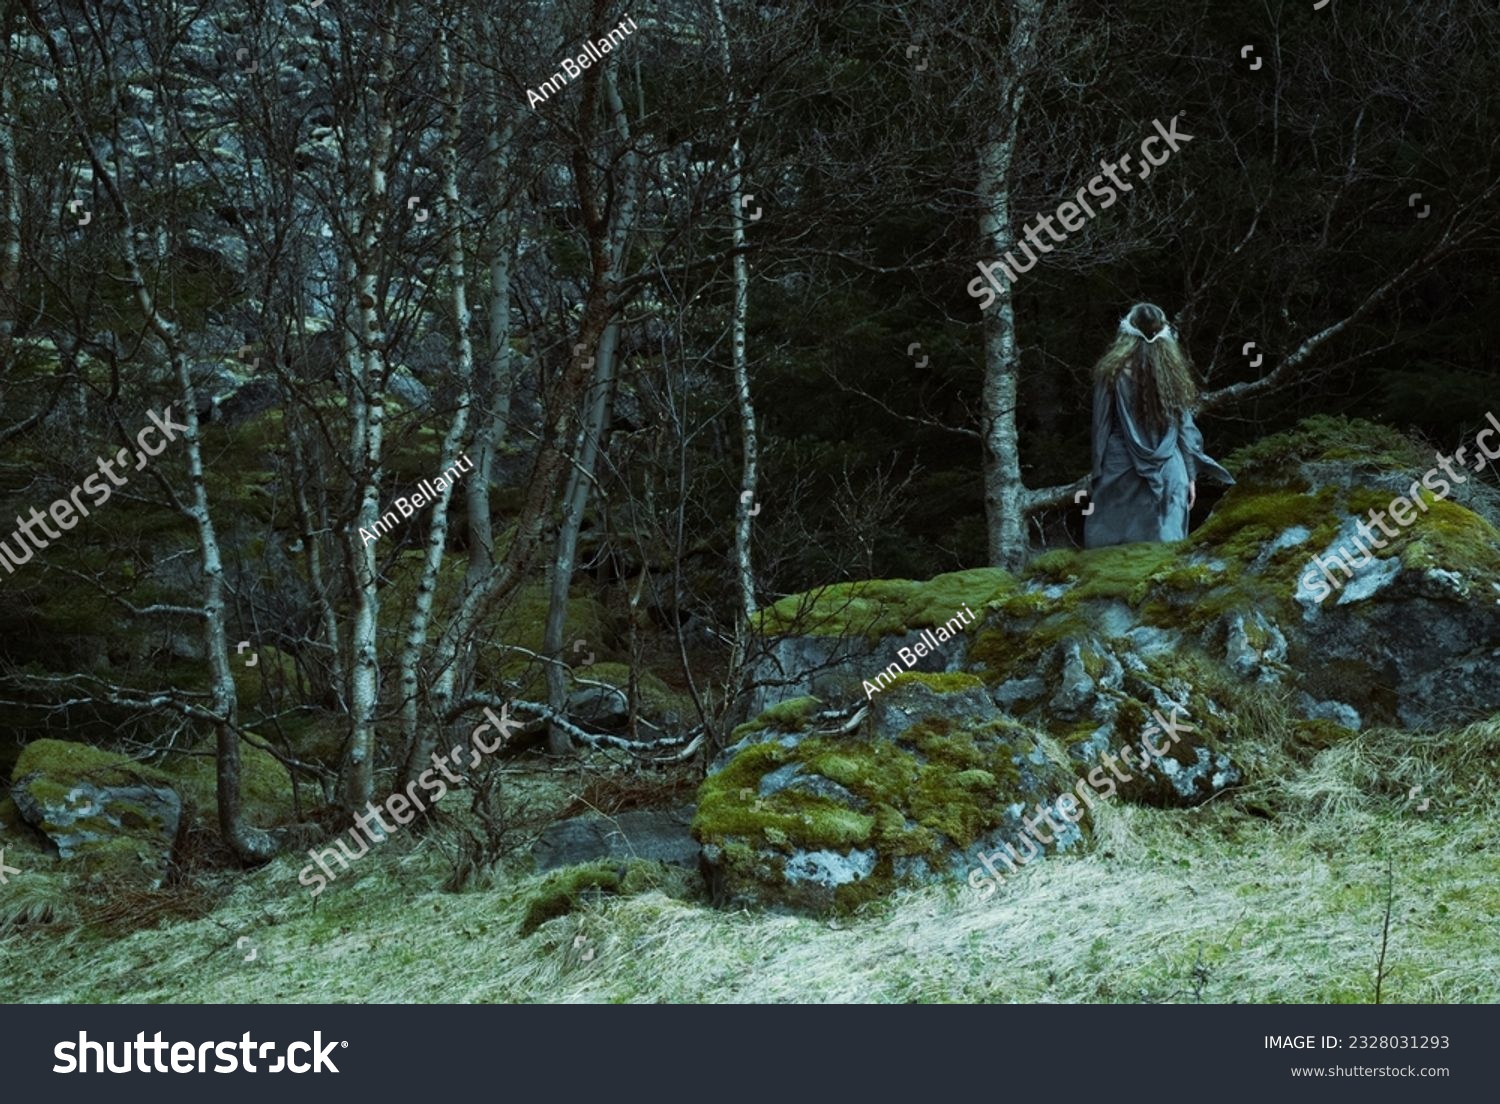 Norse woman looking into dense woods. Medieval clothing and closeness to nature evokes another time and world lost to us in our modern world. Creative coloring and textures evokes mysticism. #2328031293